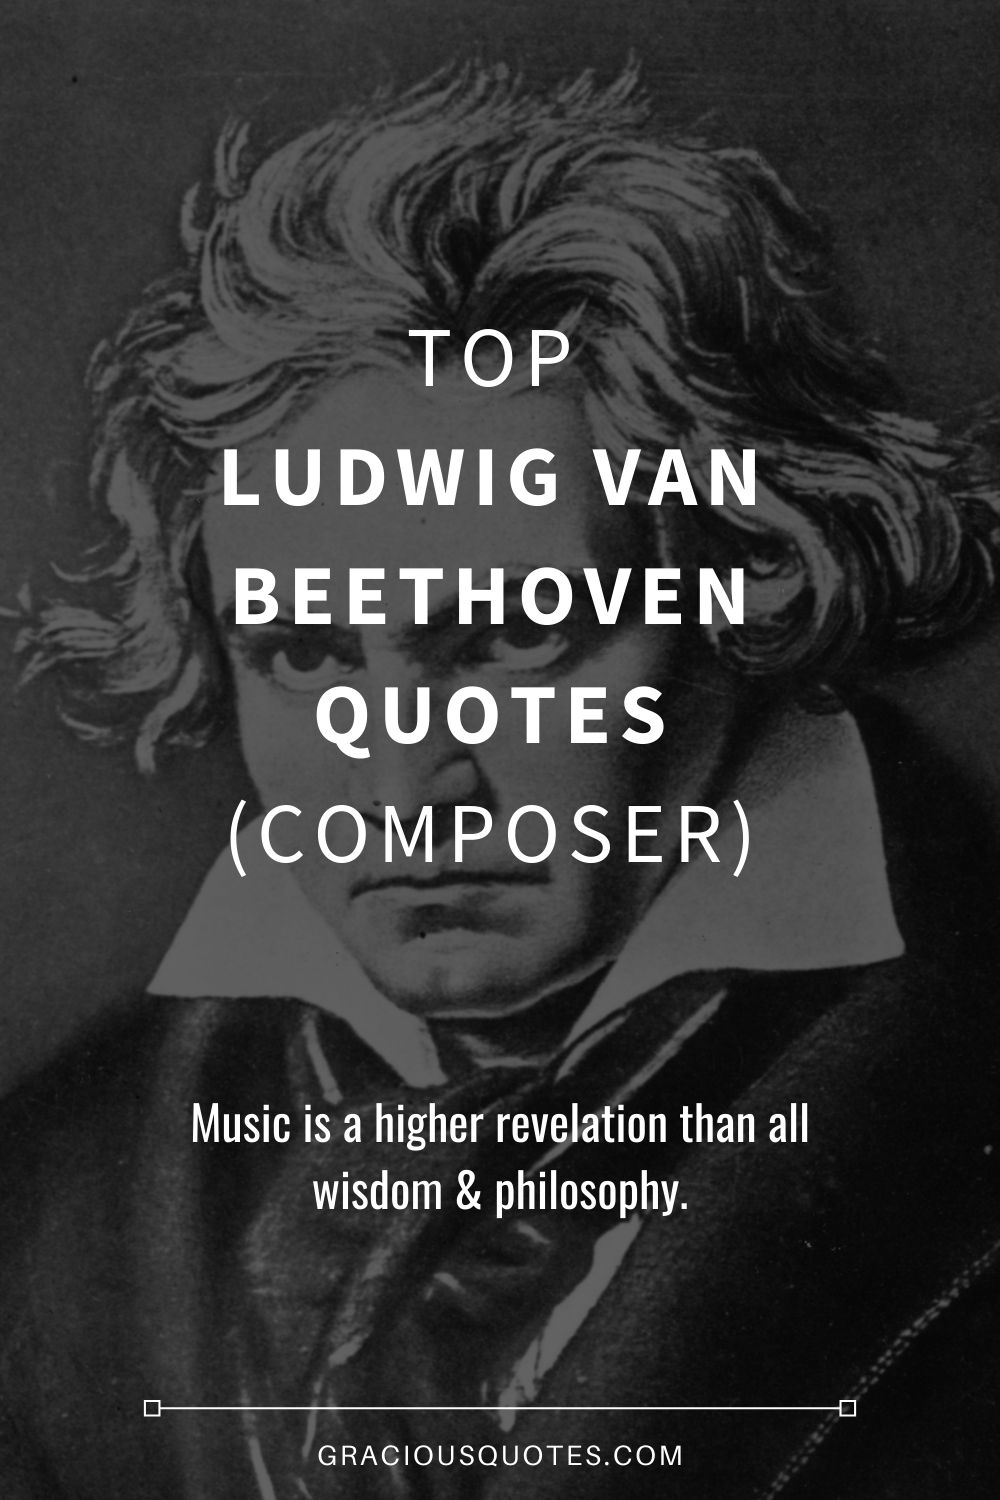 Top Ludwig van Beethoven Quotes (COMPOSER) - Gracious Quotes